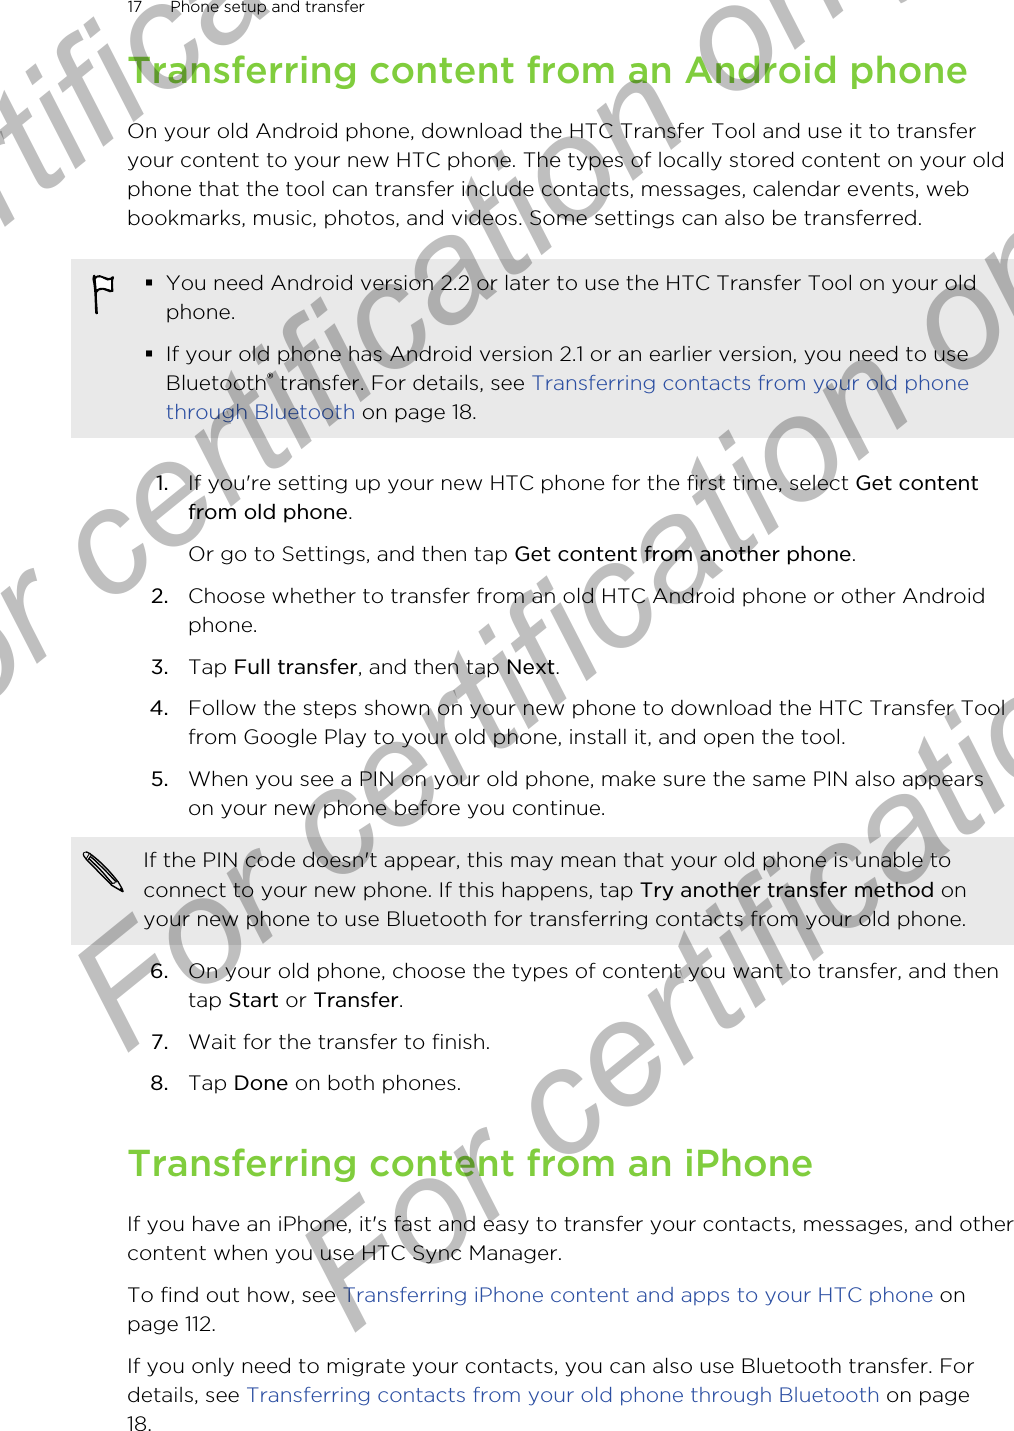 Transferring content from an Android phoneOn your old Android phone, download the HTC Transfer Tool and use it to transferyour content to your new HTC phone. The types of locally stored content on your oldphone that the tool can transfer include contacts, messages, calendar events, webbookmarks, music, photos, and videos. Some settings can also be transferred.§You need Android version 2.2 or later to use the HTC Transfer Tool on your oldphone.§If your old phone has Android version 2.1 or an earlier version, you need to useBluetooth® transfer. For details, see Transferring contacts from your old phonethrough Bluetooth on page 18.1. If you&apos;re setting up your new HTC phone for the first time, select Get contentfrom old phone. Or go to Settings, and then tap Get content from another phone.2. Choose whether to transfer from an old HTC Android phone or other Androidphone.3. Tap Full transfer, and then tap Next.4. Follow the steps shown on your new phone to download the HTC Transfer Toolfrom Google Play to your old phone, install it, and open the tool.5. When you see a PIN on your old phone, make sure the same PIN also appearson your new phone before you continue. If the PIN code doesn&apos;t appear, this may mean that your old phone is unable toconnect to your new phone. If this happens, tap Try another transfer method onyour new phone to use Bluetooth for transferring contacts from your old phone.6. On your old phone, choose the types of content you want to transfer, and thentap Start or Transfer.7. Wait for the transfer to finish.8. Tap Done on both phones.Transferring content from an iPhoneIf you have an iPhone, it&apos;s fast and easy to transfer your contacts, messages, and othercontent when you use HTC Sync Manager.To find out how, see Transferring iPhone content and apps to your HTC phone onpage 112.If you only need to migrate your contacts, you can also use Bluetooth transfer. Fordetails, see Transferring contacts from your old phone through Bluetooth on page18.17 Phone setup and transferFor certification only  For certification only  For certification only  For certification only 